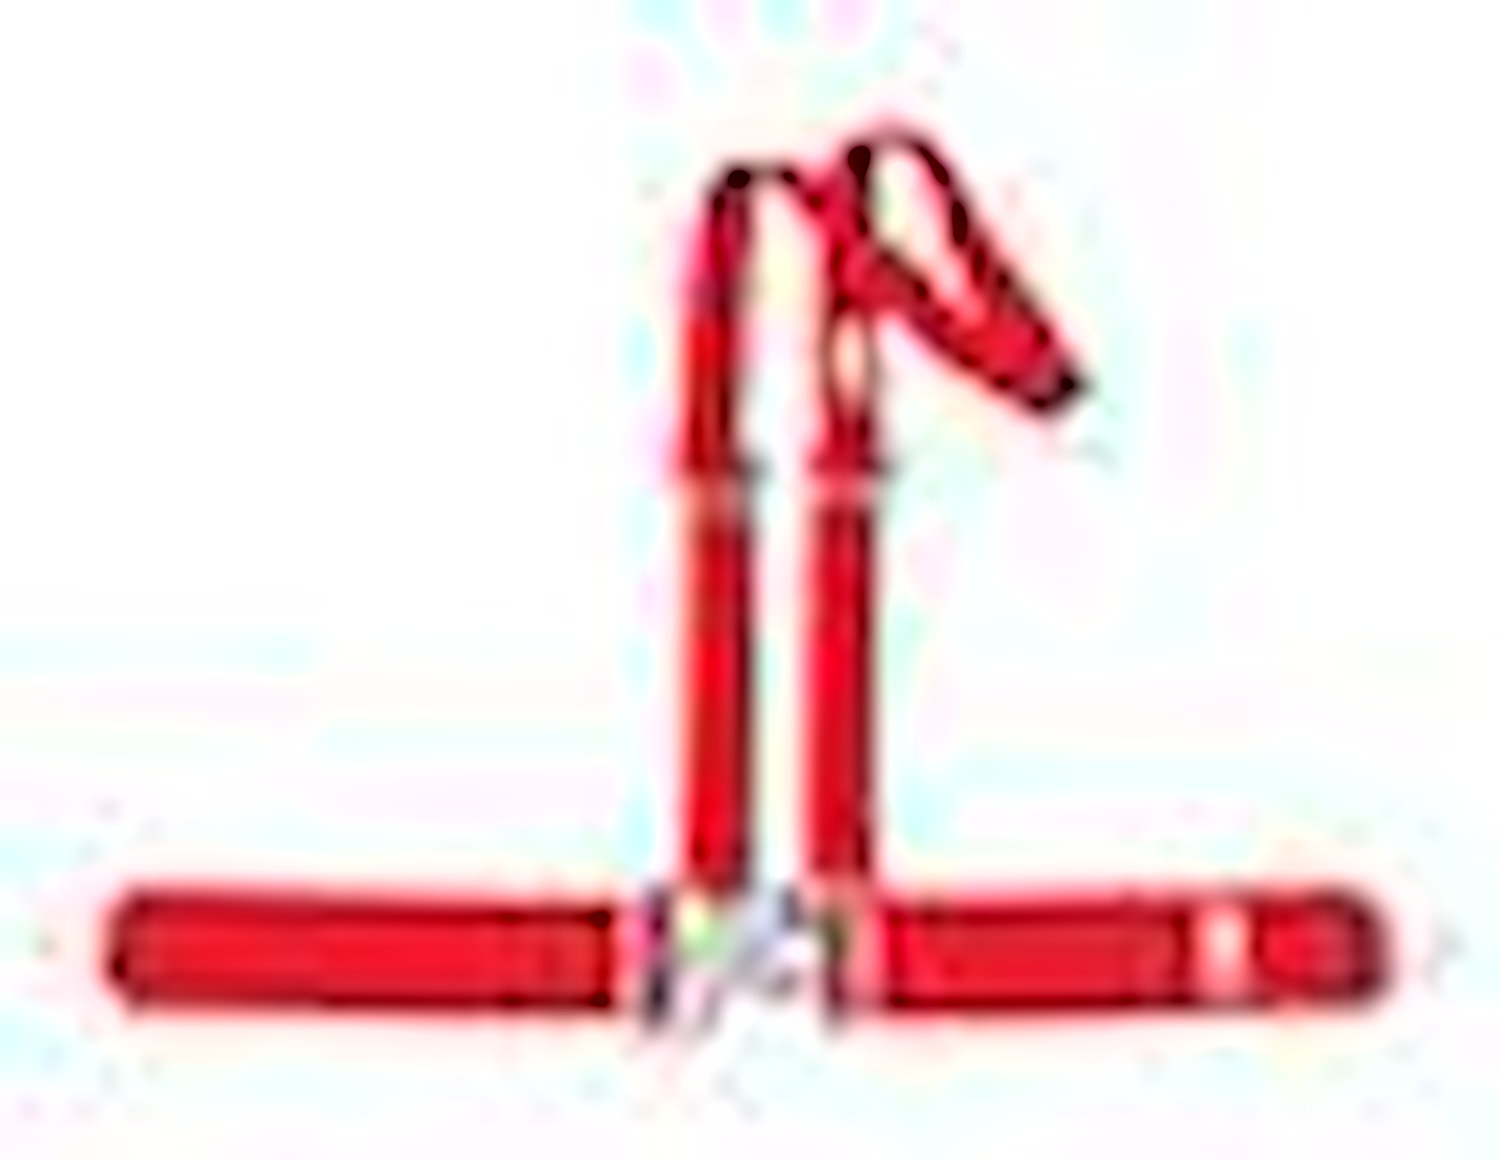 NON-SFI L&L HARNESS 3 PULL DOWN Lap Belt w/adjuster 2 S.H. V ROLL BAR Mount ALL BOLT ENDS RED